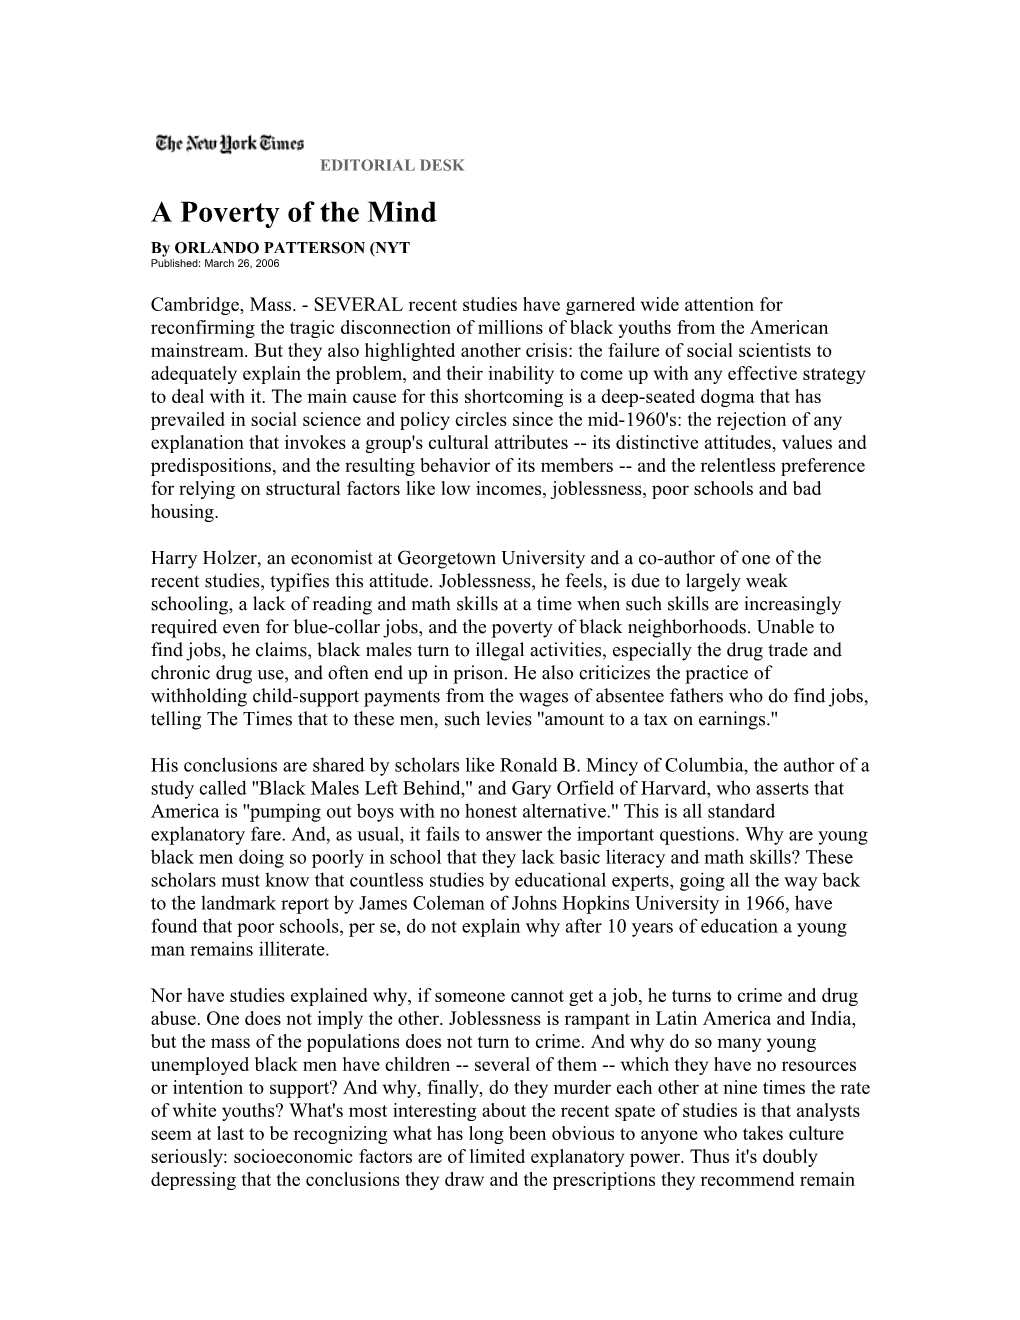 A Poverty of the Mind